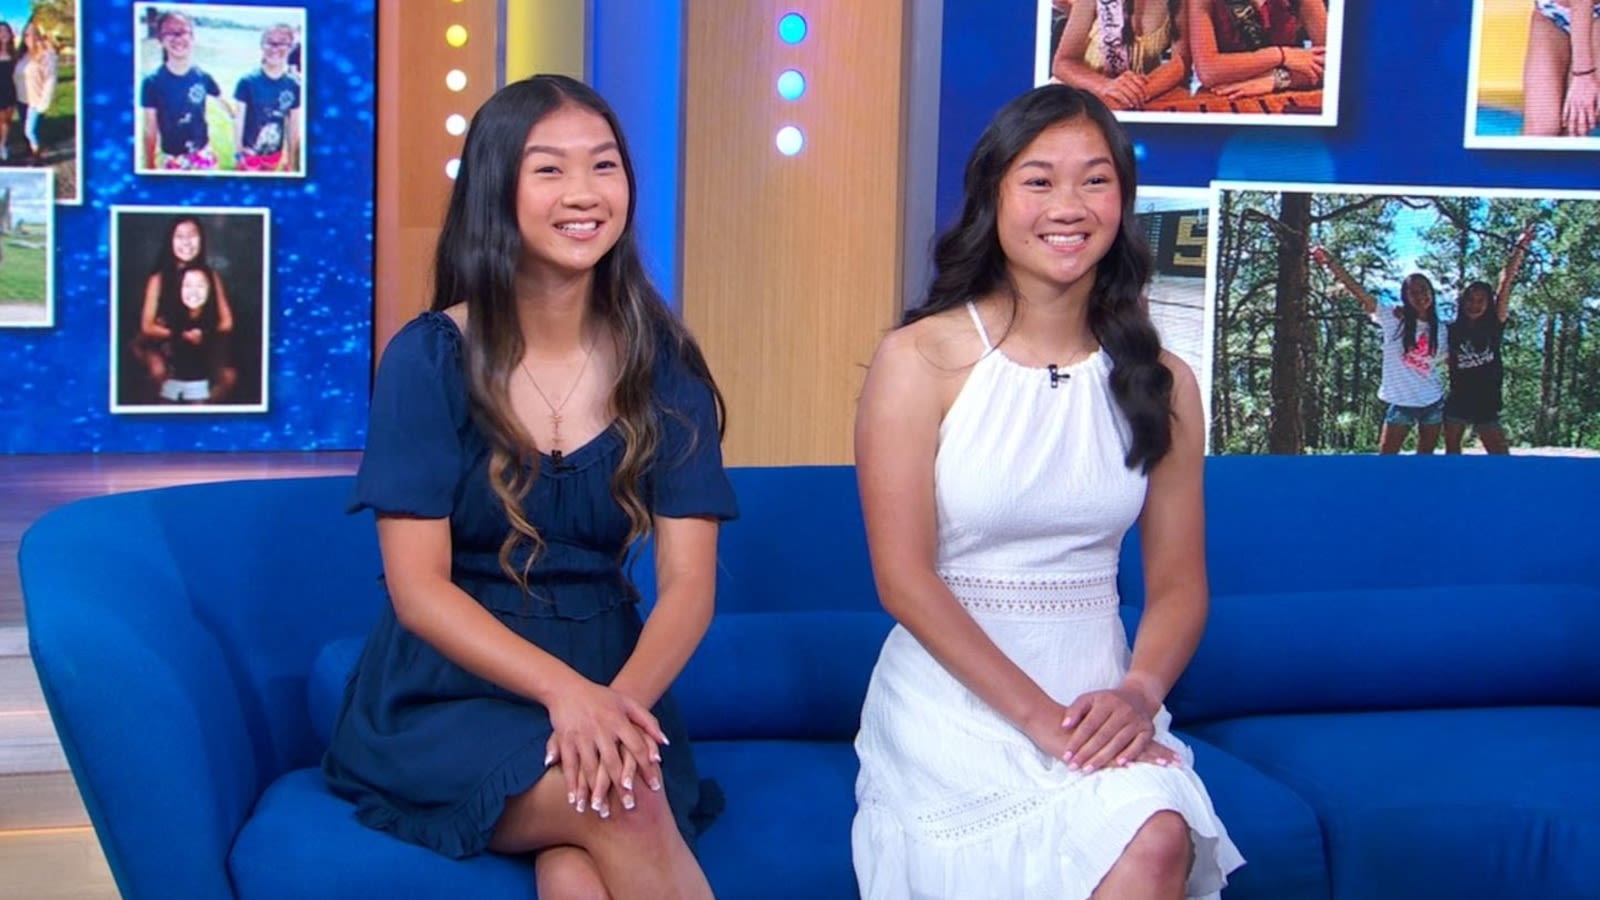 Twins who didn’t meet until age 10 are now both high school valedictorians